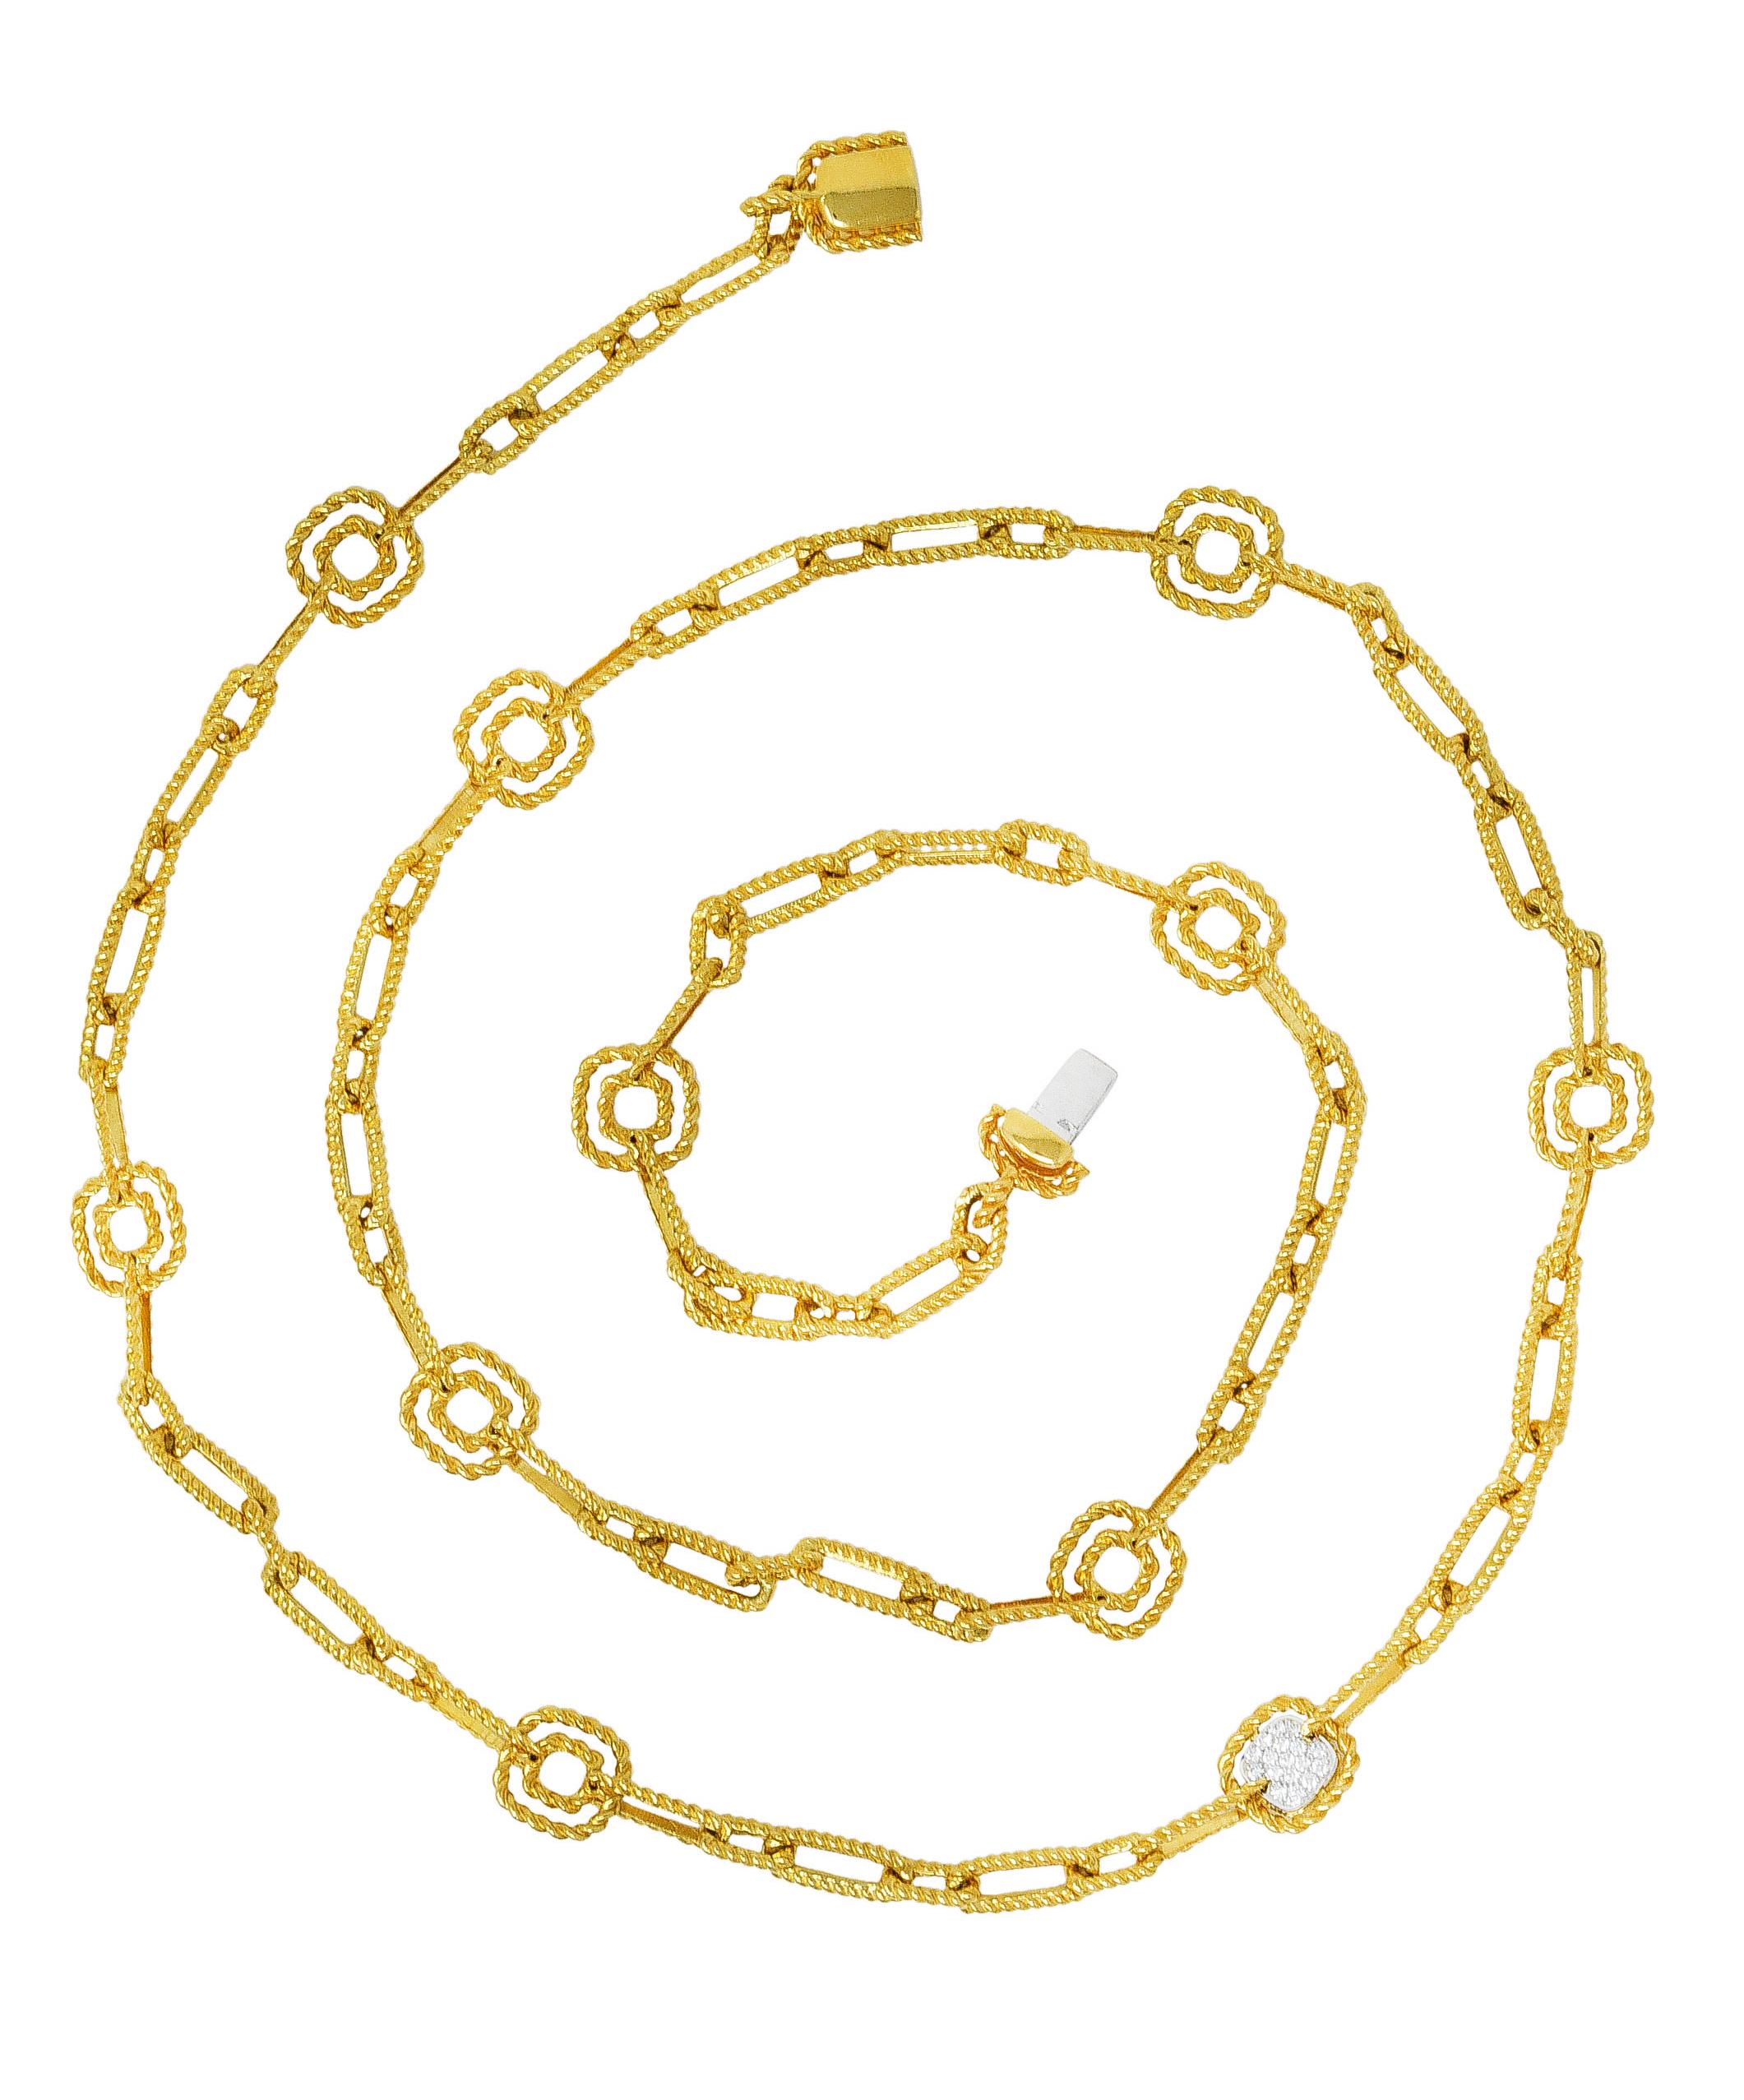 Necklace is designed as a stylized twisted rope chain comprised of rectangular and square links. Featuring round brilliant cut diamonds pavè set in the white gold center of a square link. Weighing approximately 0.25 carat total - eye clean and